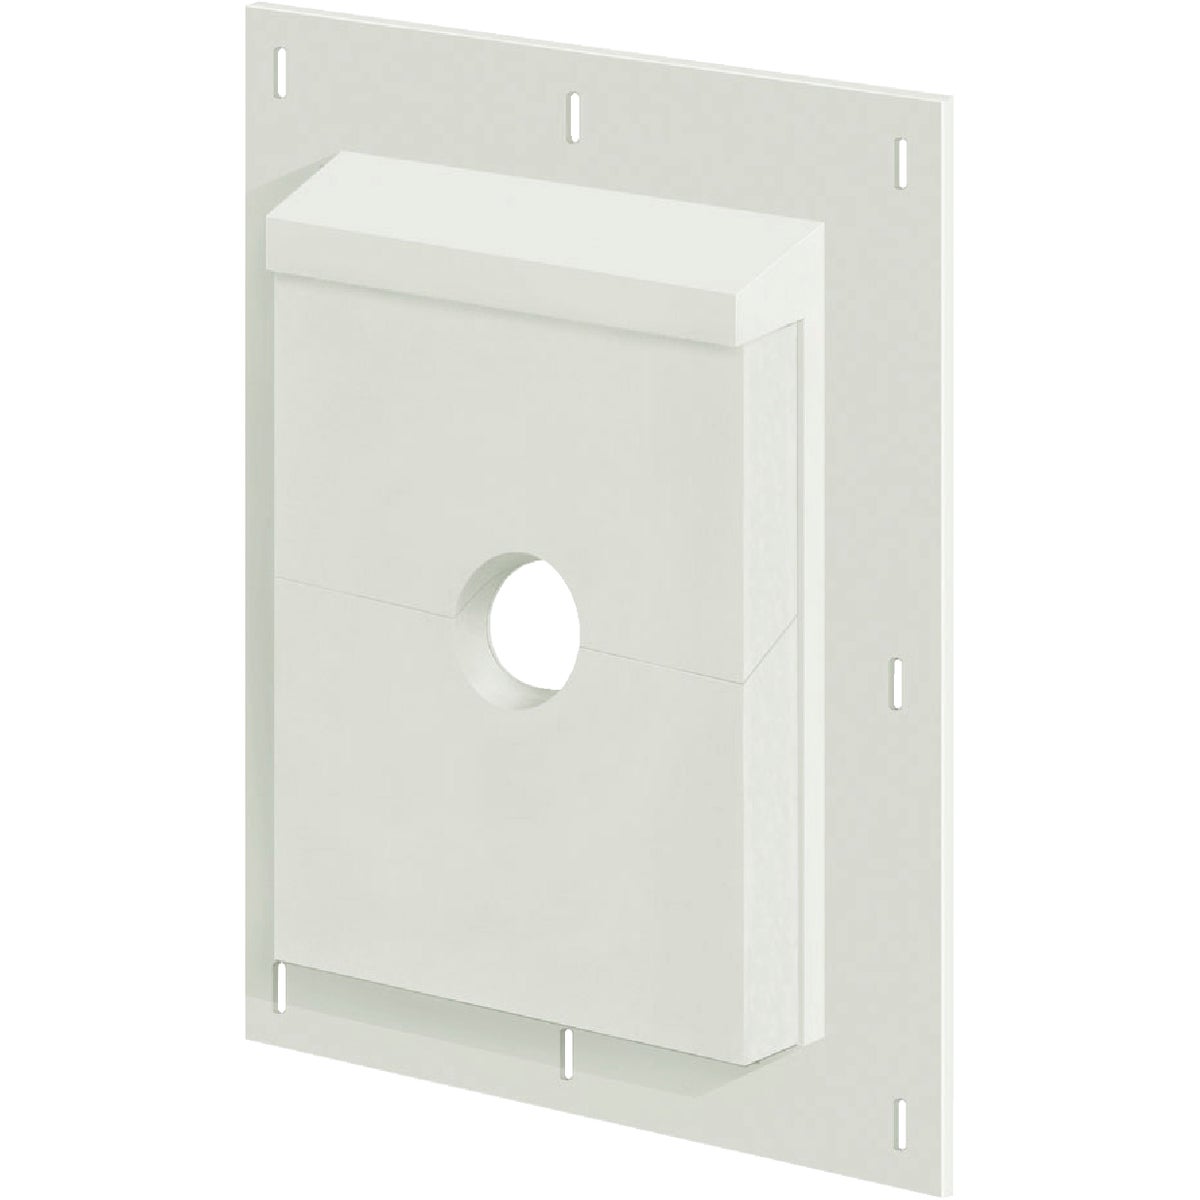 Item 109153, The pre-flashed, pre-assembled mounts are manufactured of fiber cement with